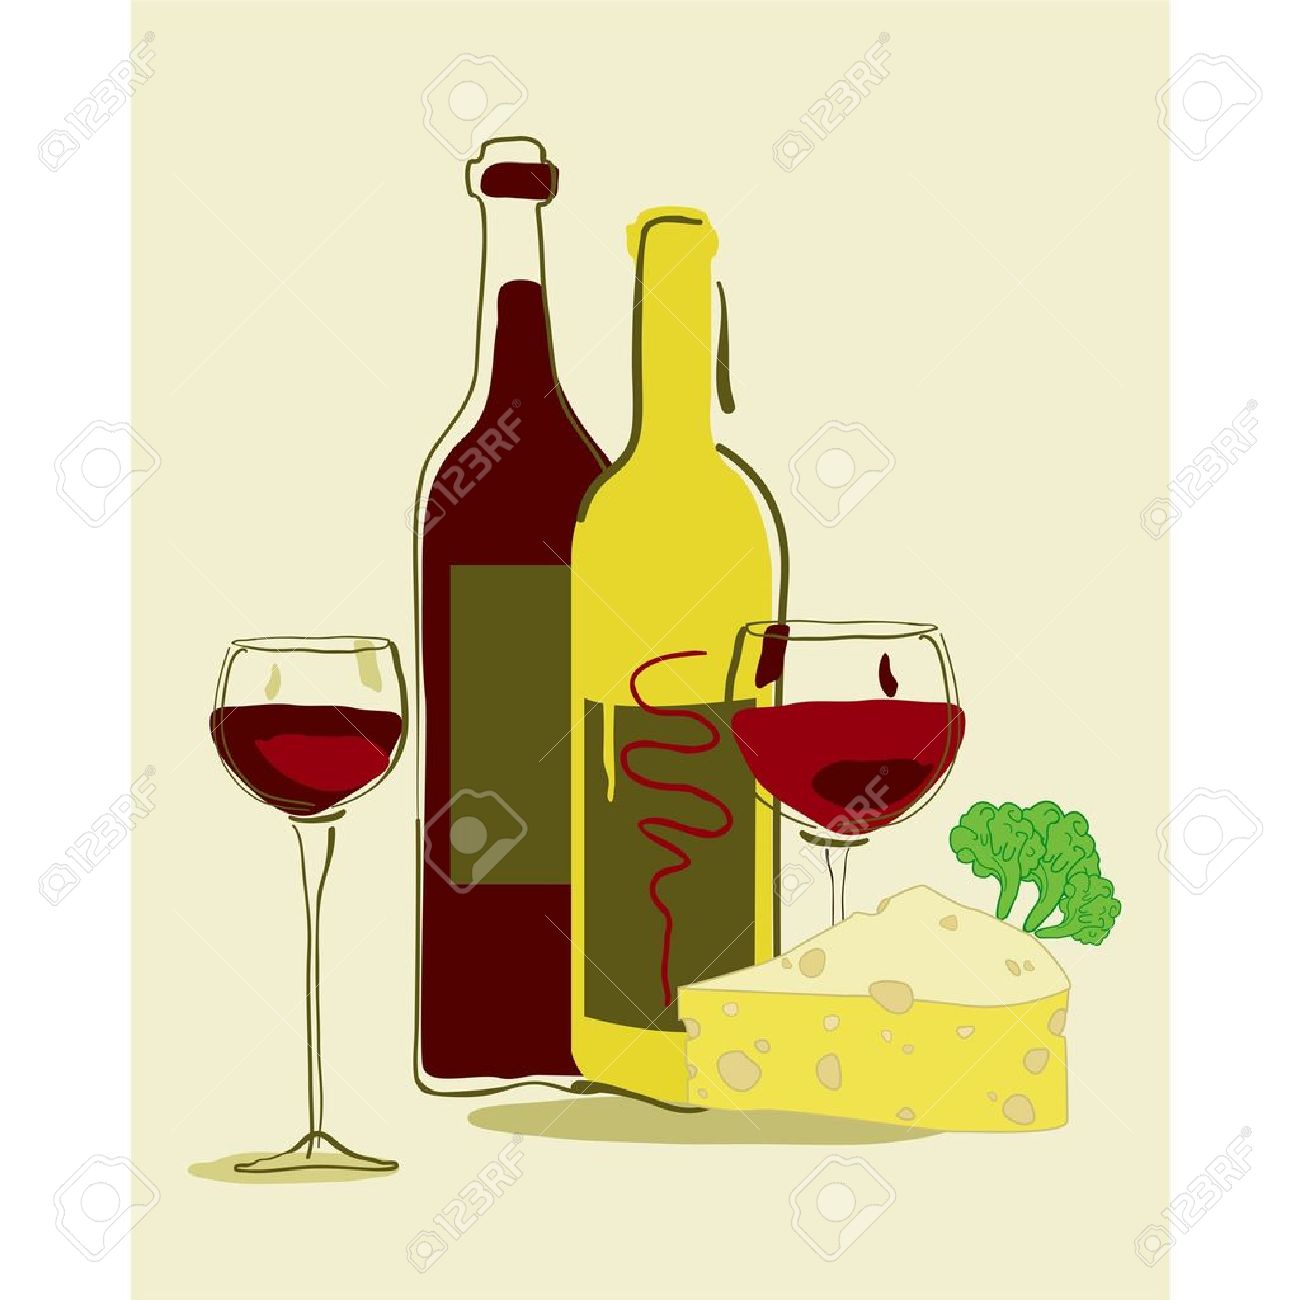 wine and cheese: Red wine and .